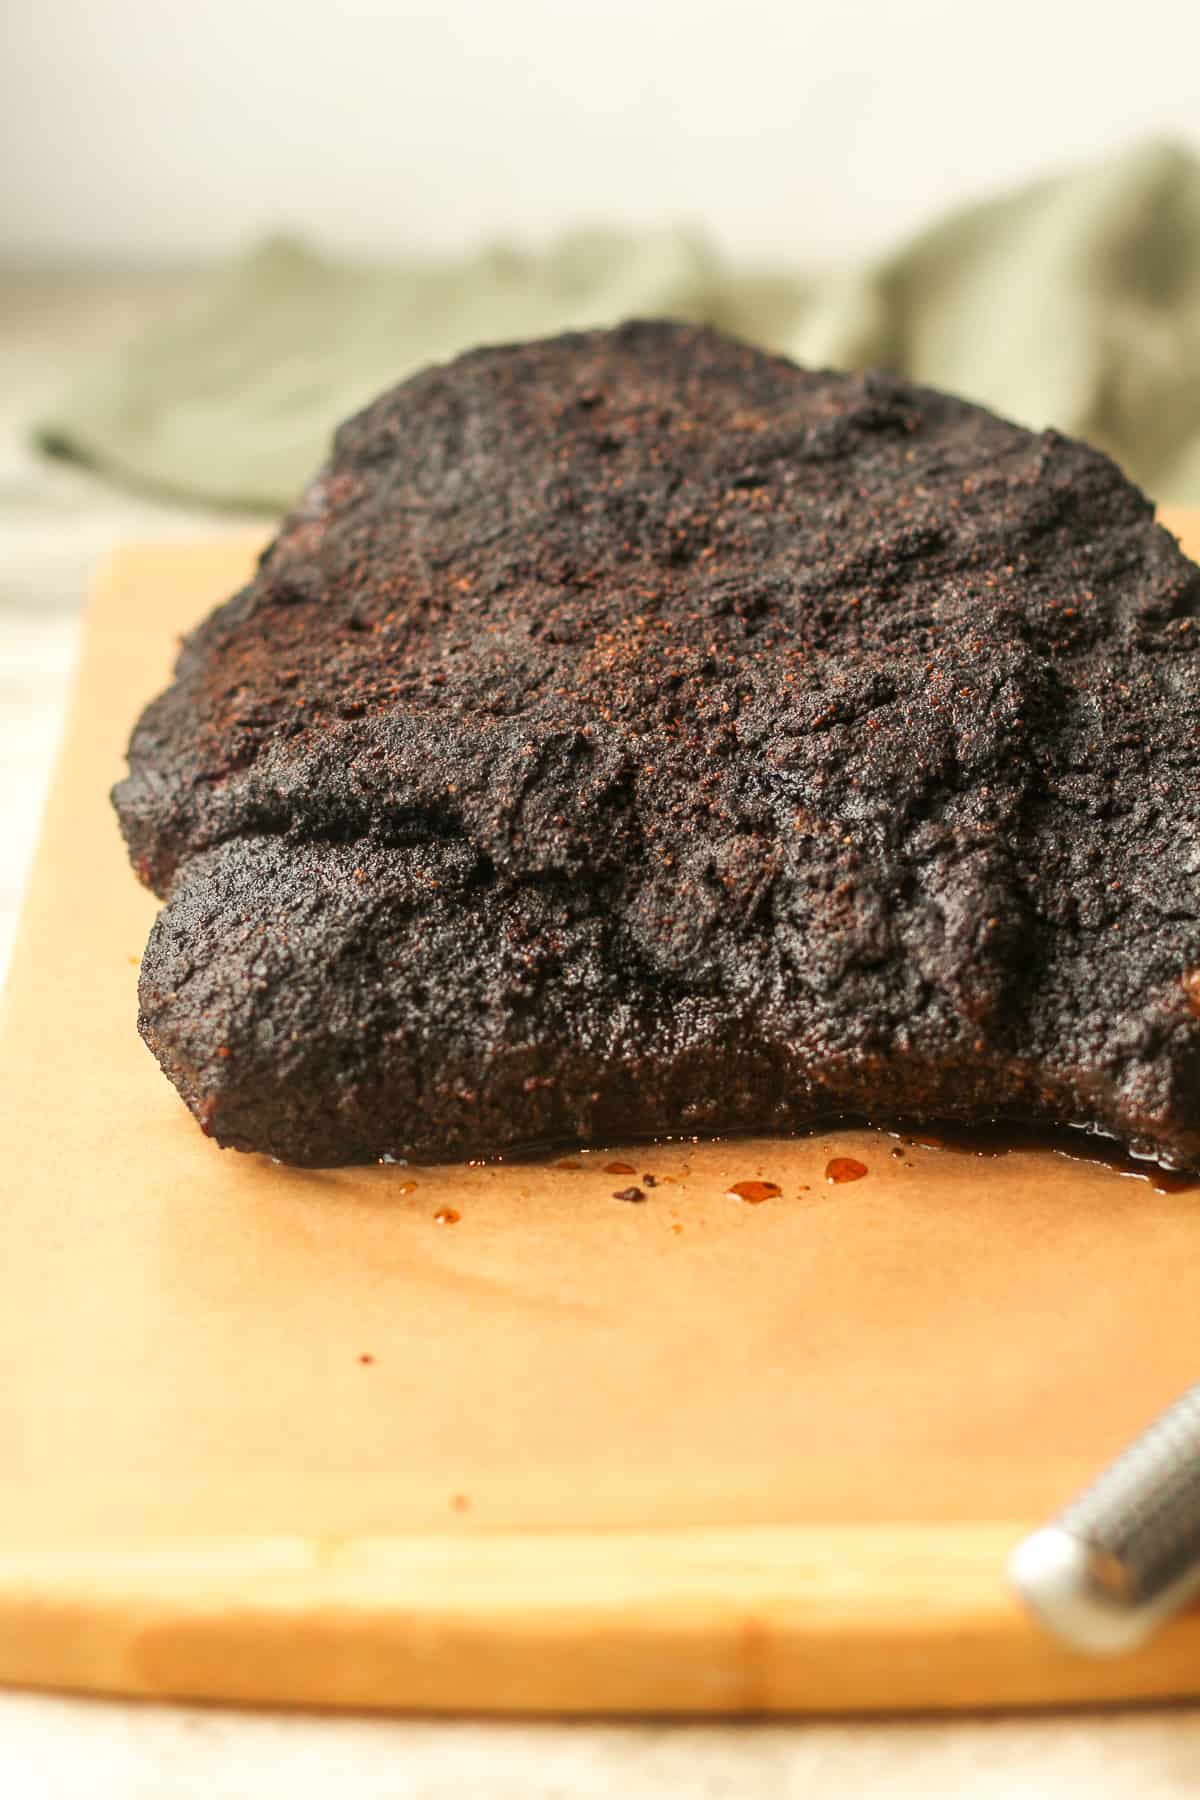 Side view of a cooked brisket on a board.